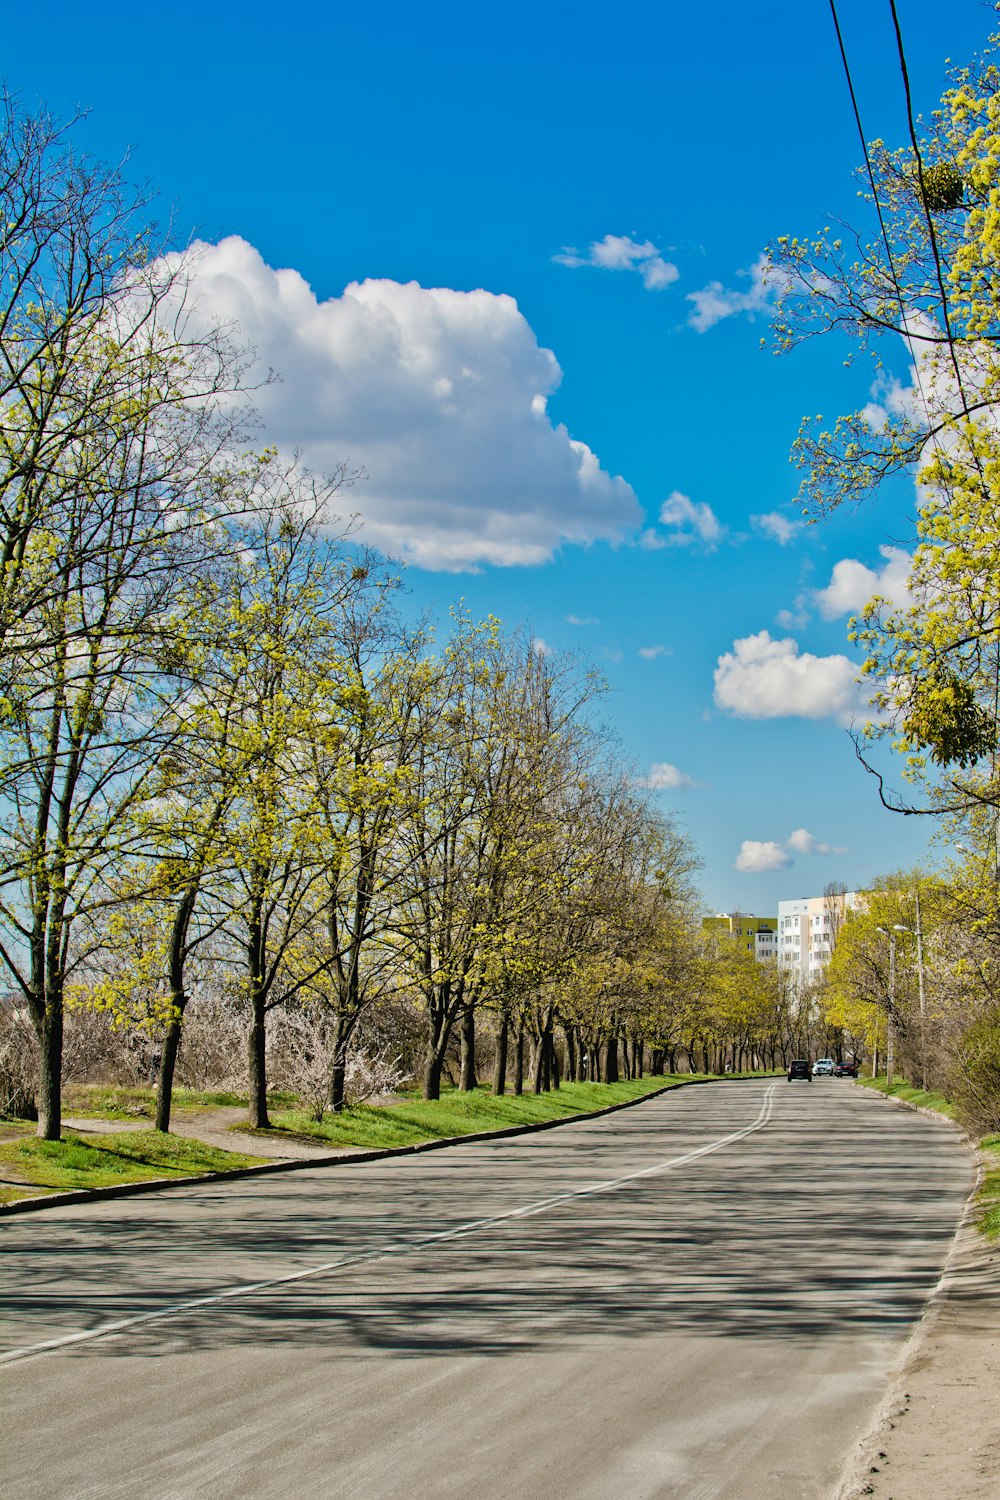 a street lined with trees and buildings under a blue sky